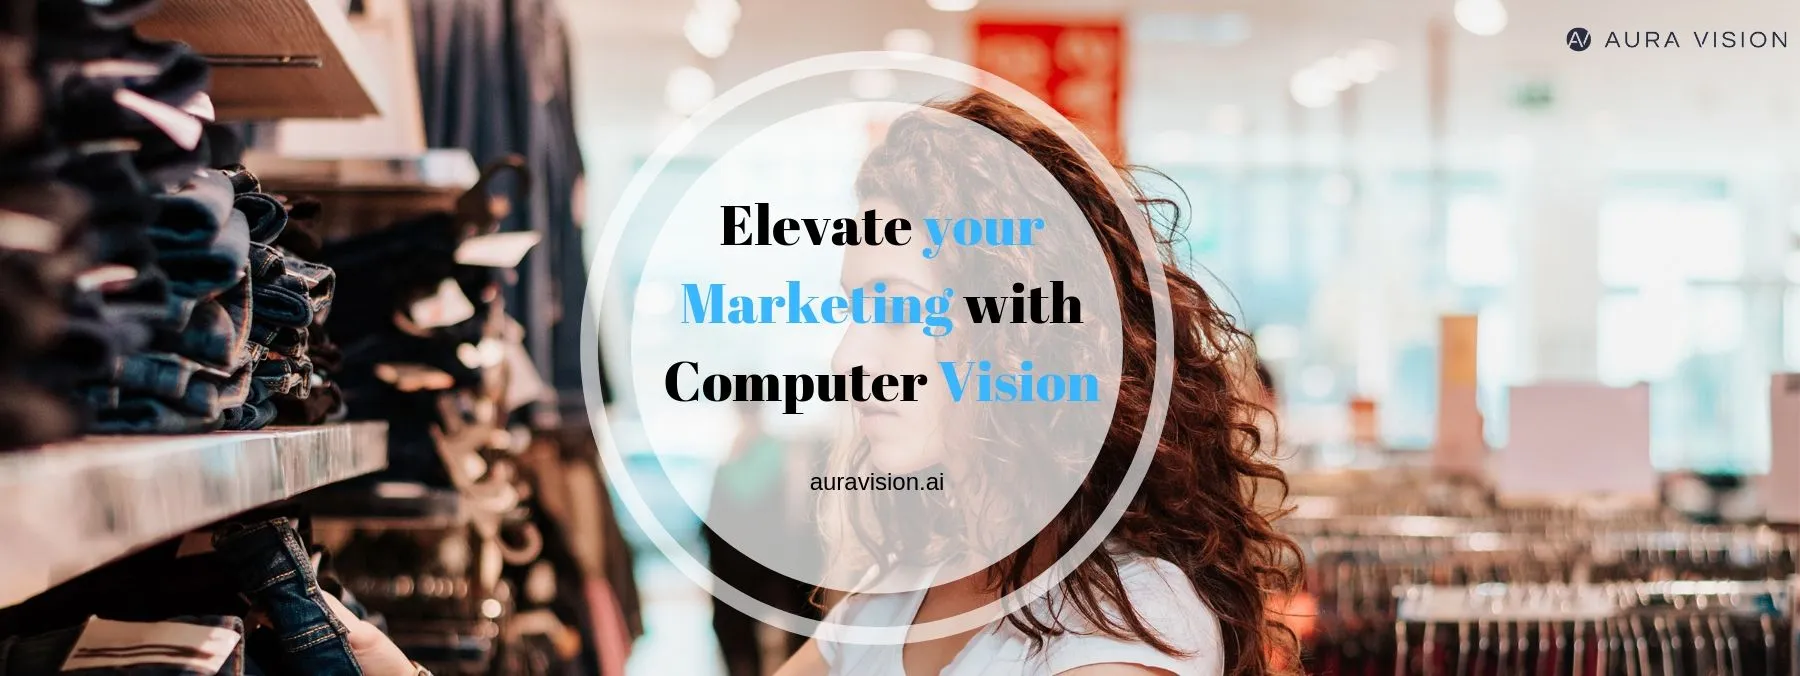 How to Elevate your Marketing with Computer Vision?